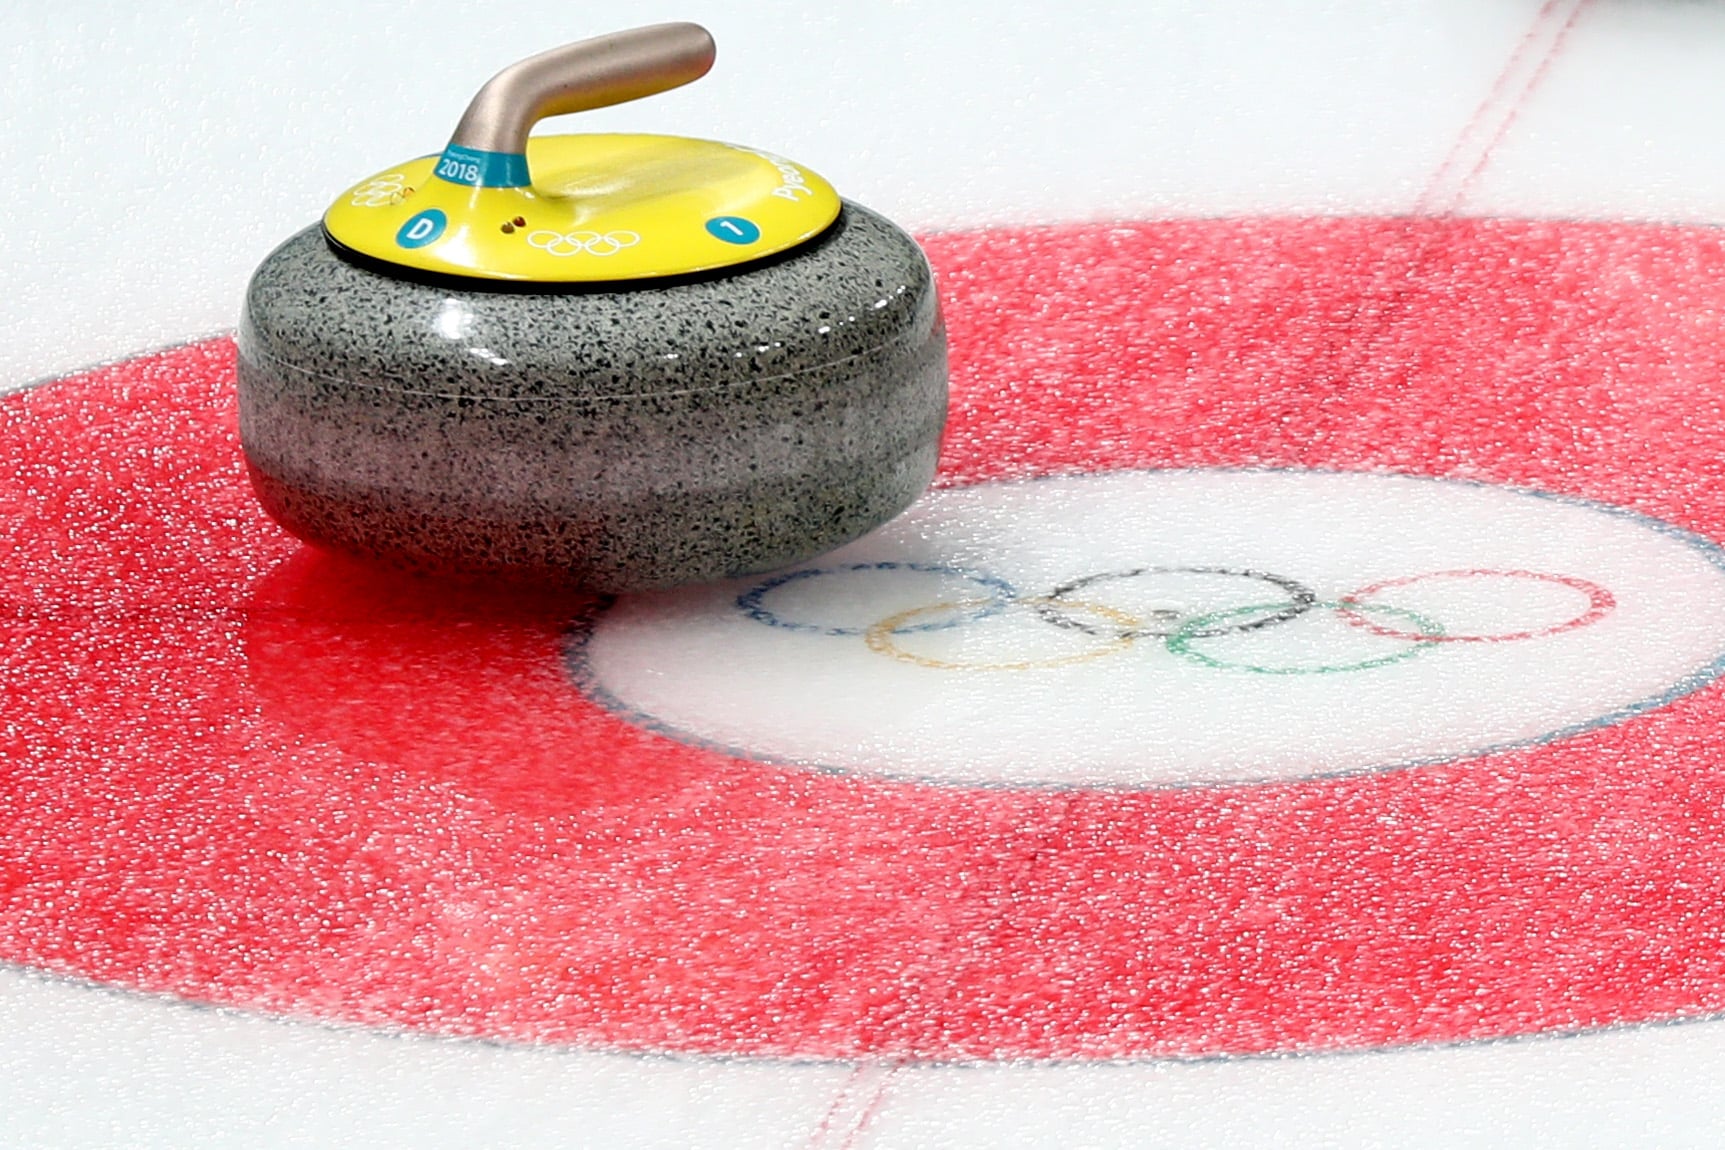 GANGNEUNG, SOUTH KOREA - FEBRUARY 16: A detail of a stone during the Curling Women's Round Robin Session 4 at Gangneung Curling Centre on February 16, 2018 in Gangneung, South Korea.(Photo by Maddie Meyer/Getty Images)